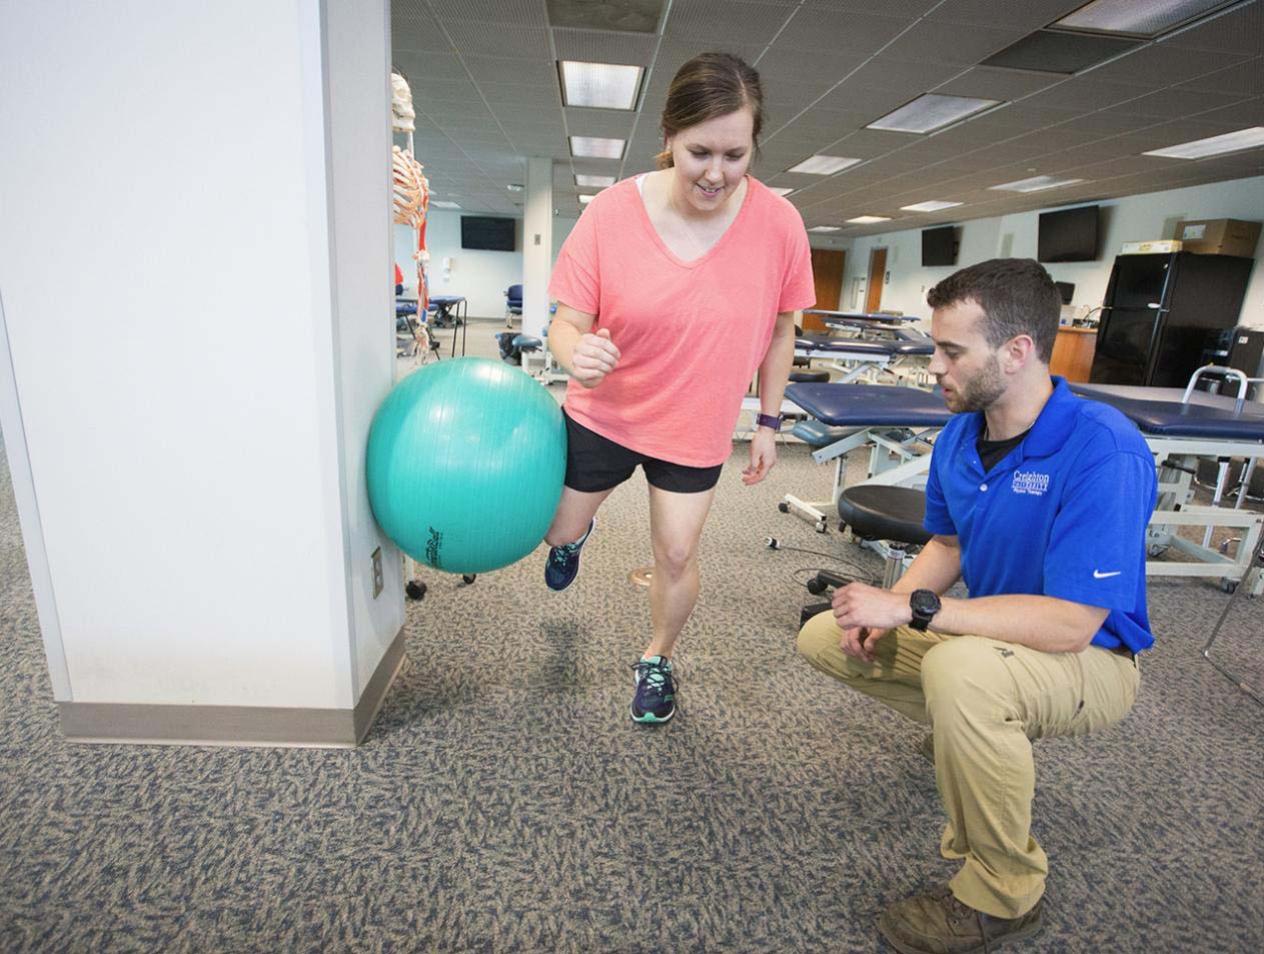 PT therapy with a ball